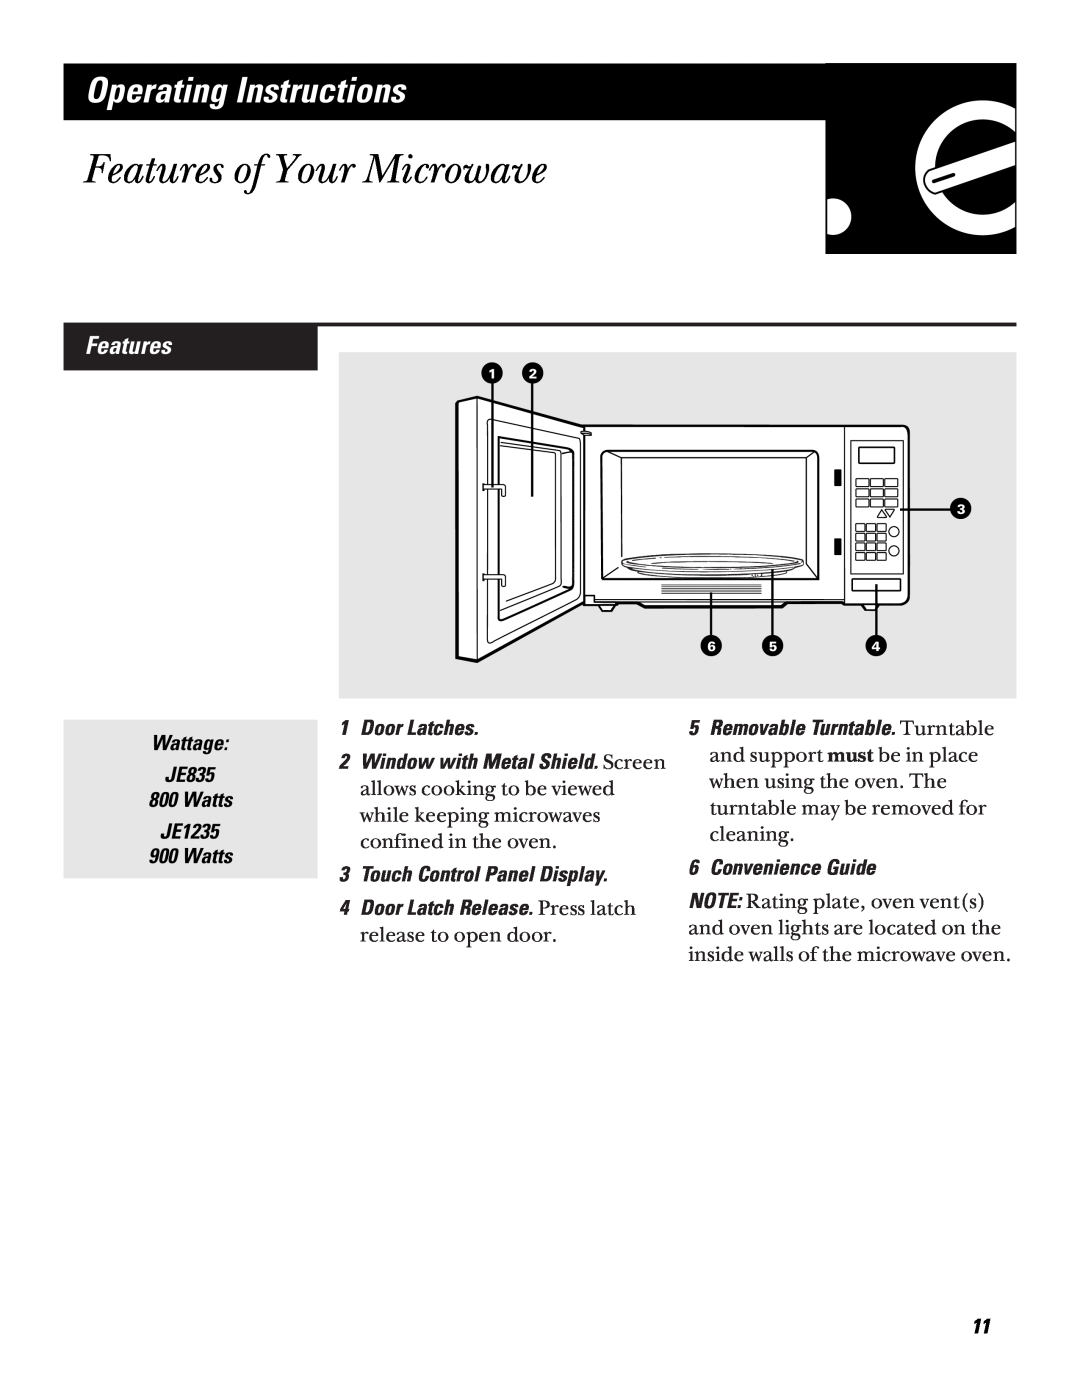 GE JE1235, JE835 operating instructions Features of Your Microwave, Operating Instructions 